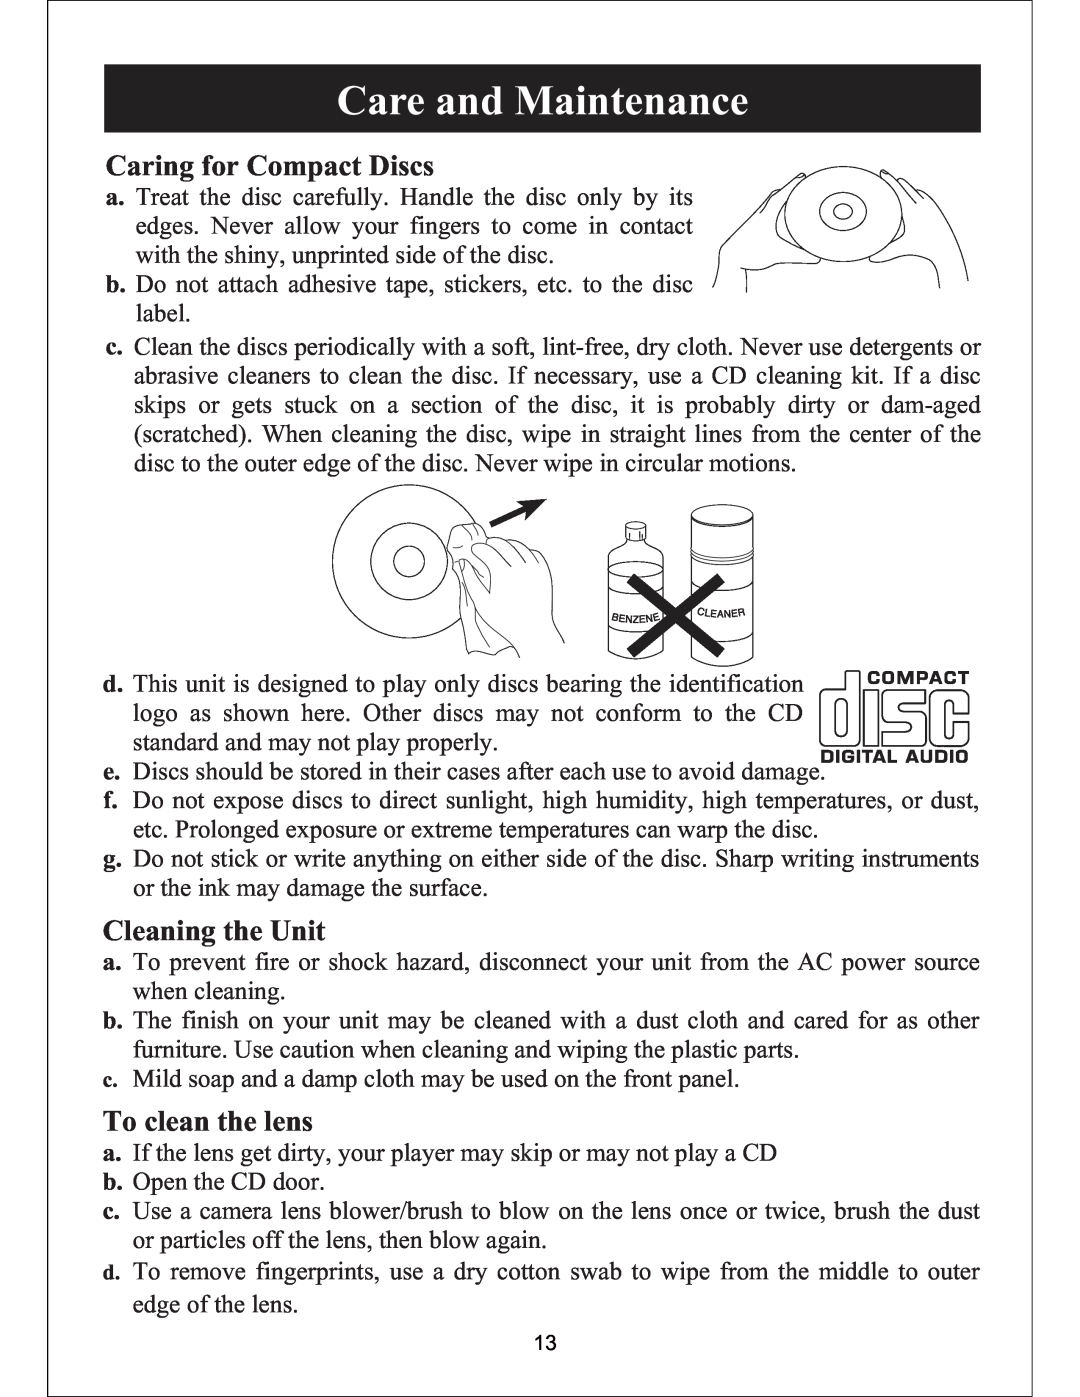 Sylvania SIP3019 instruction manual Care and Maintenance, Caring for Compact Discs, Cleaning the Unit, To clean the lens 